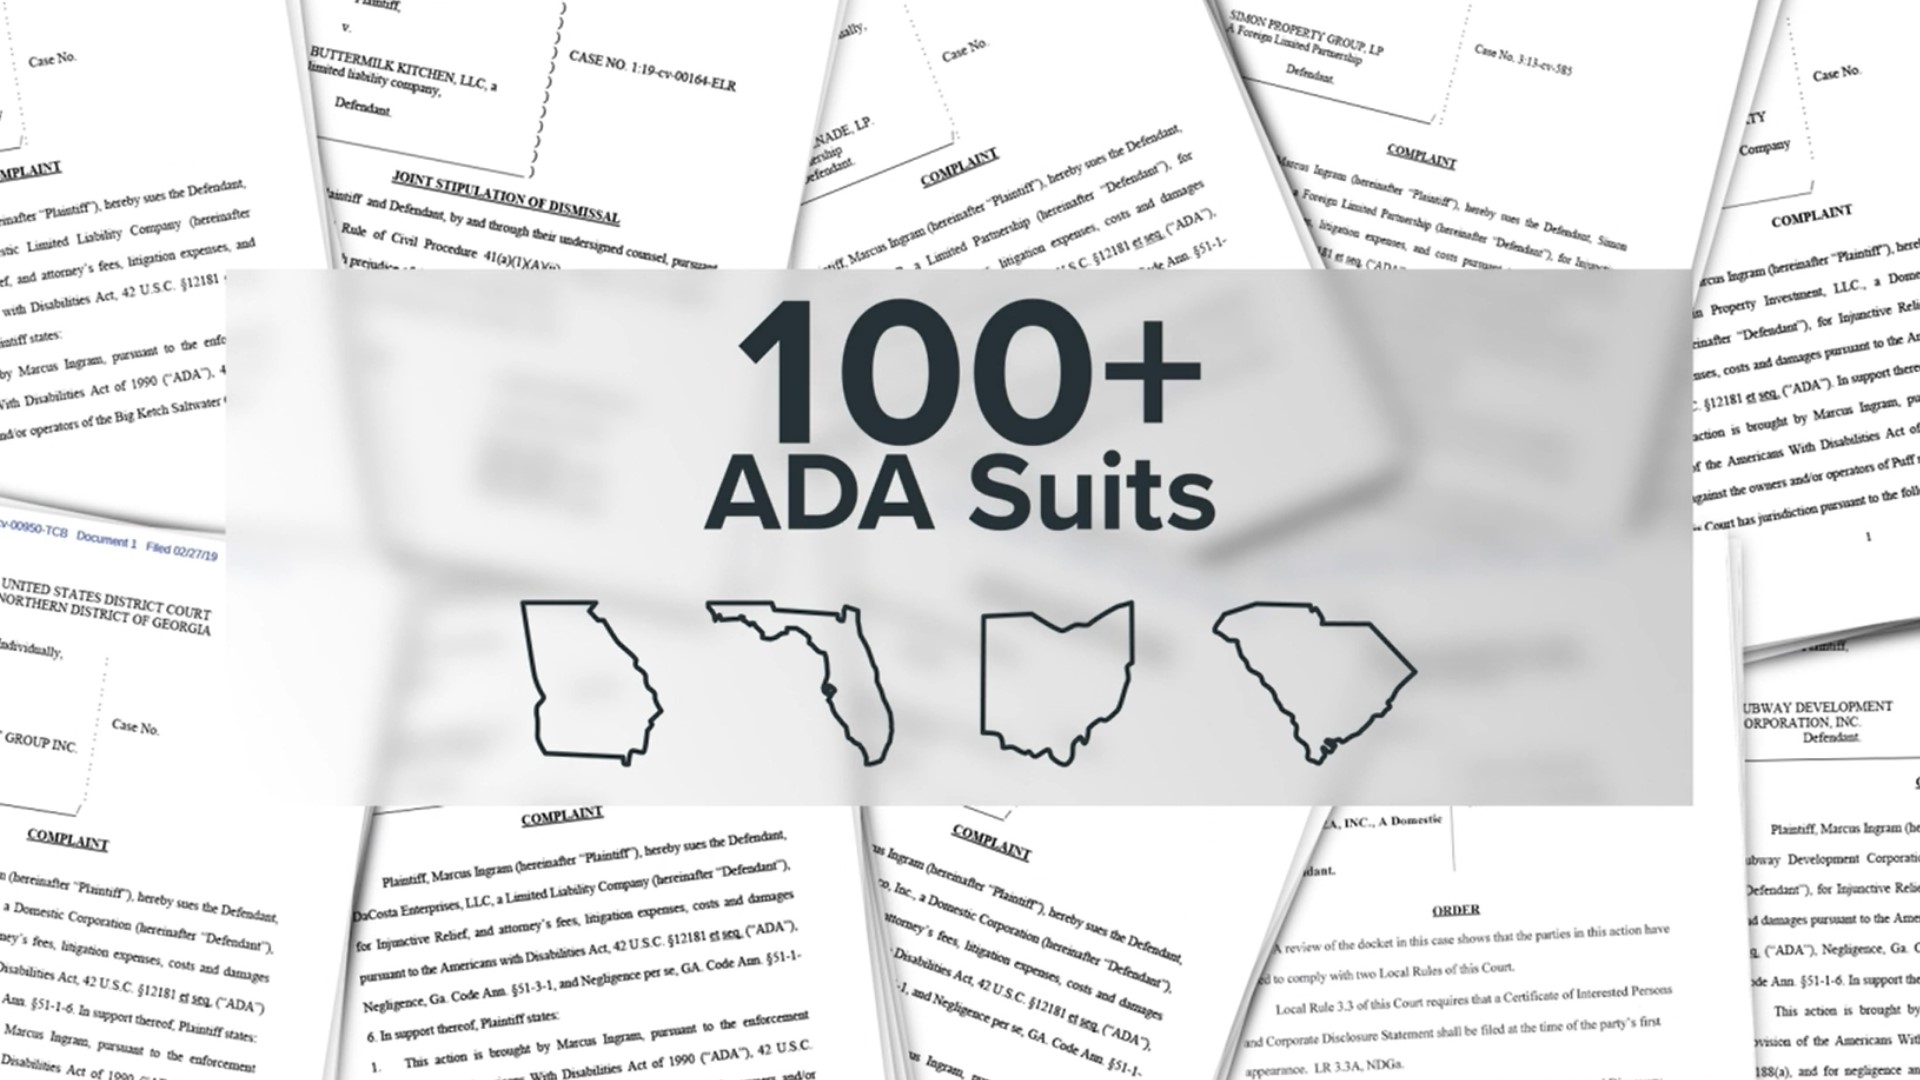 Court records show a man filed more than 100 lawsuits alleging ADA violations at several businesses across Georgia, Florida, Ohio and South Carolina.